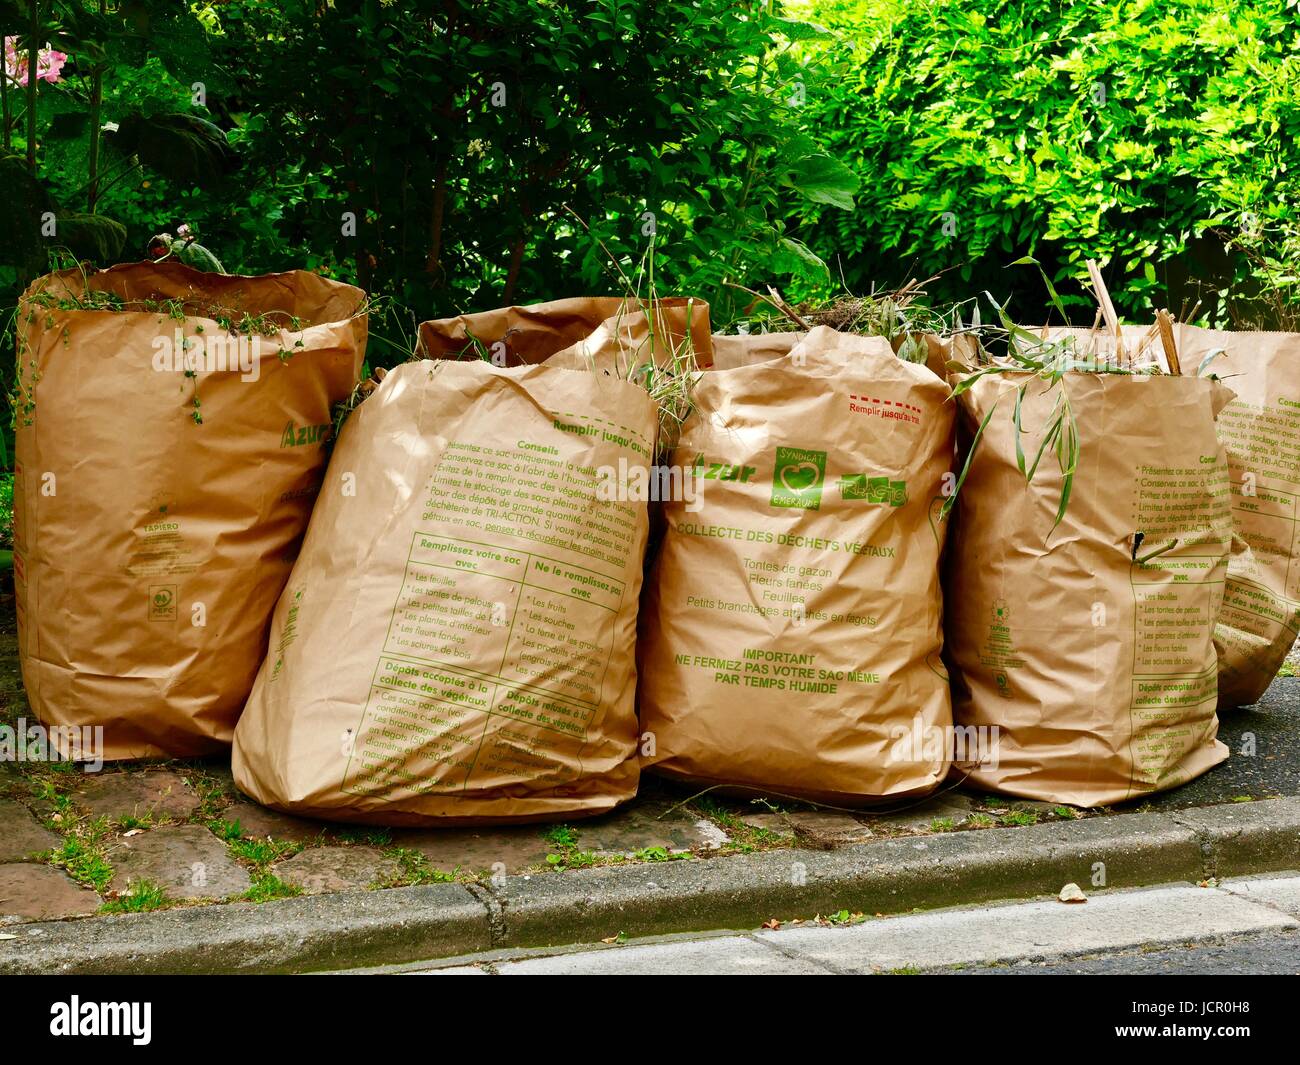 https://c8.alamy.com/comp/JCR0H8/paper-sacks-full-or-grass-and-yard-clippings-left-at-the-curb-for-JCR0H8.jpg